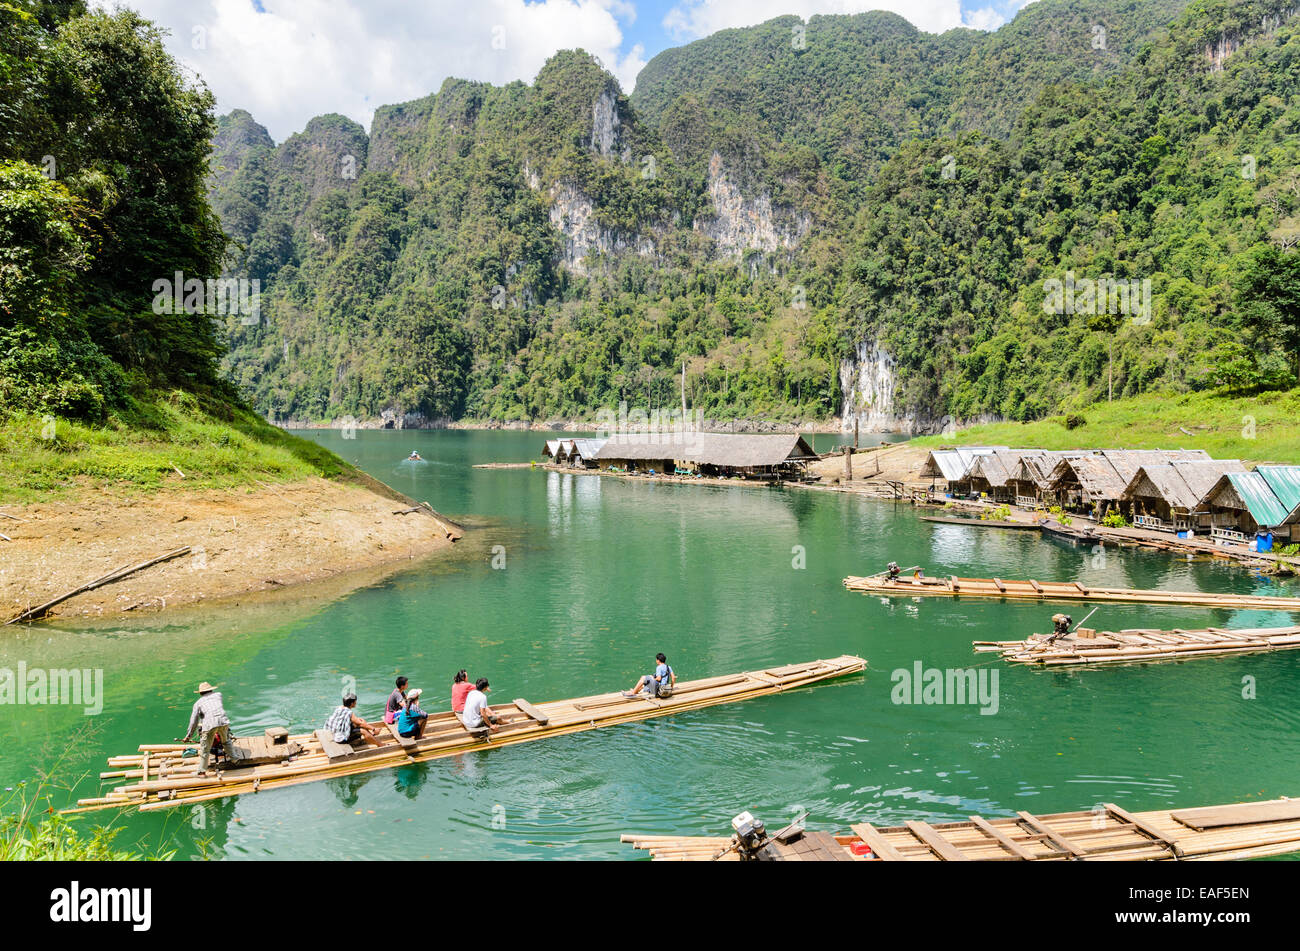 SURAT THANI, THAILAND - APR 26, 2013 : The arrival of tourists to go visit the stalactite cave by motor raft in Ratchaprapha Dam Stock Photo